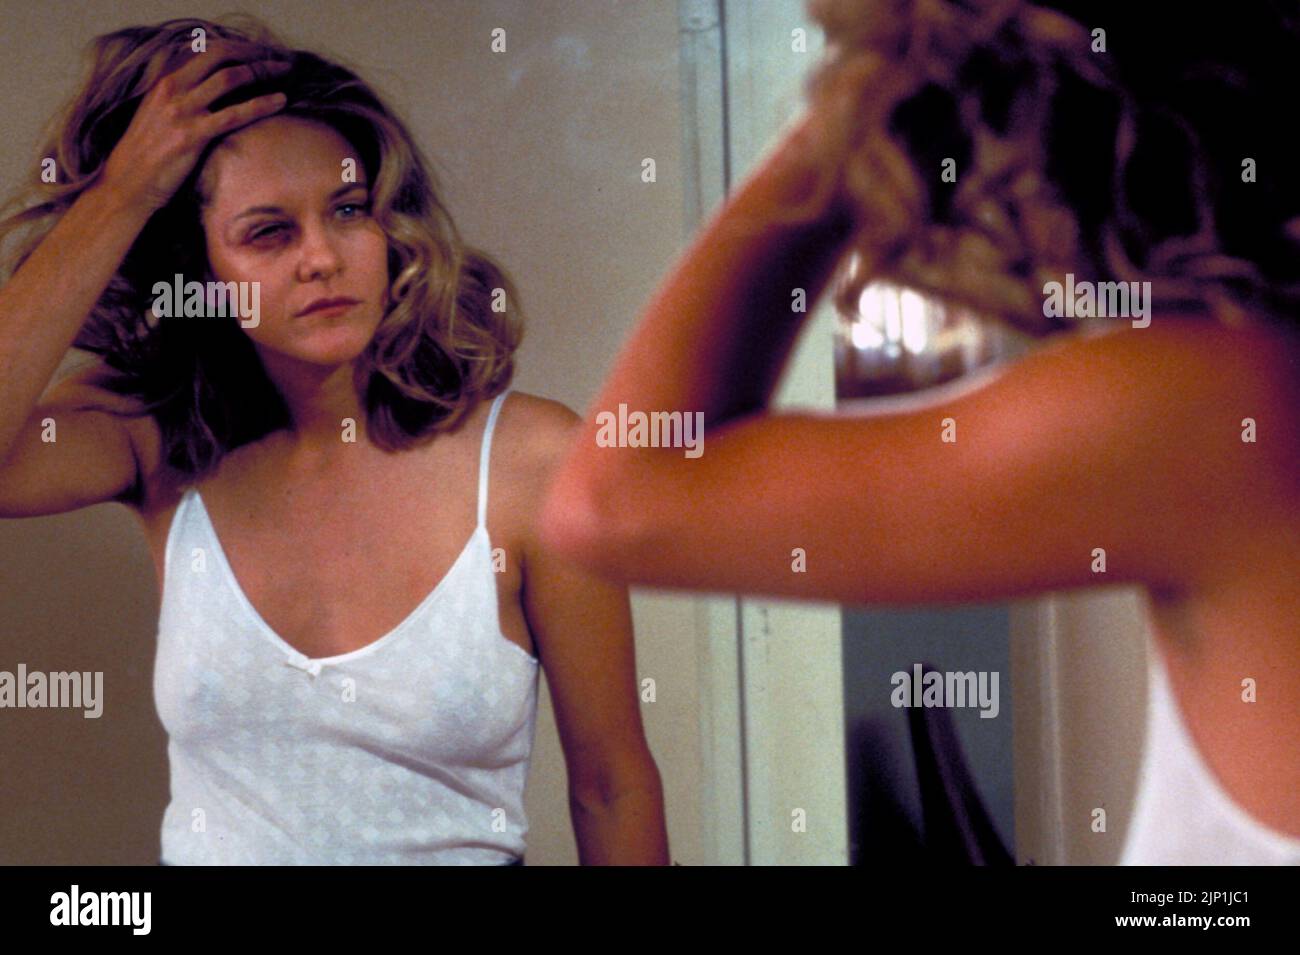 MEG RYAN in FLESH AND BONE (1993), directed by STEVEN KLOVES. Credit: PARAMOUNT PICTURES / Album Stock Photo